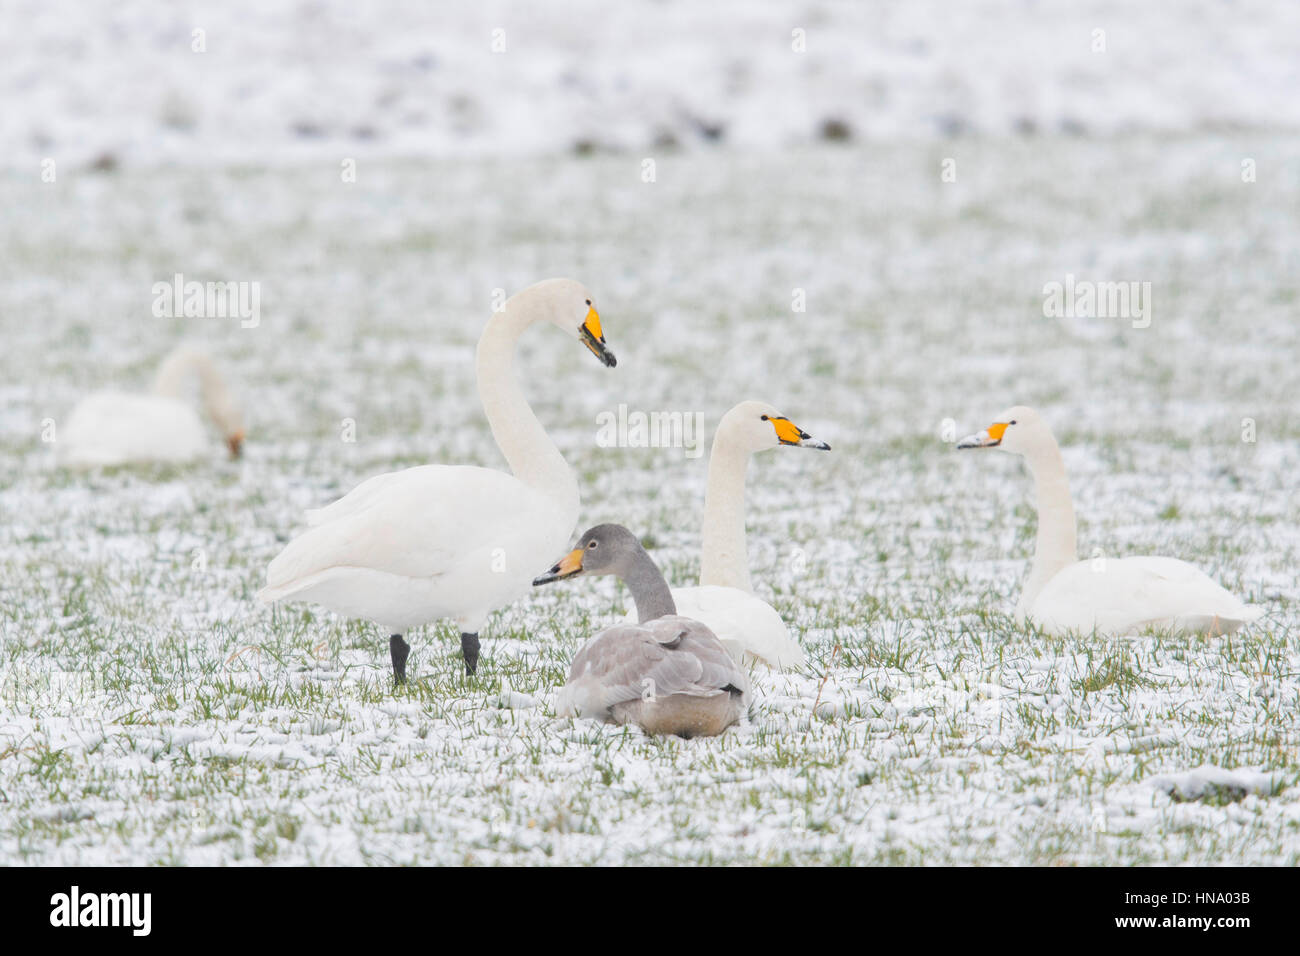 Whooper swans (Cygnus cygnus) with young bird sitting in the snow, Emsland, Lower Saxony, Germany Stock Photo